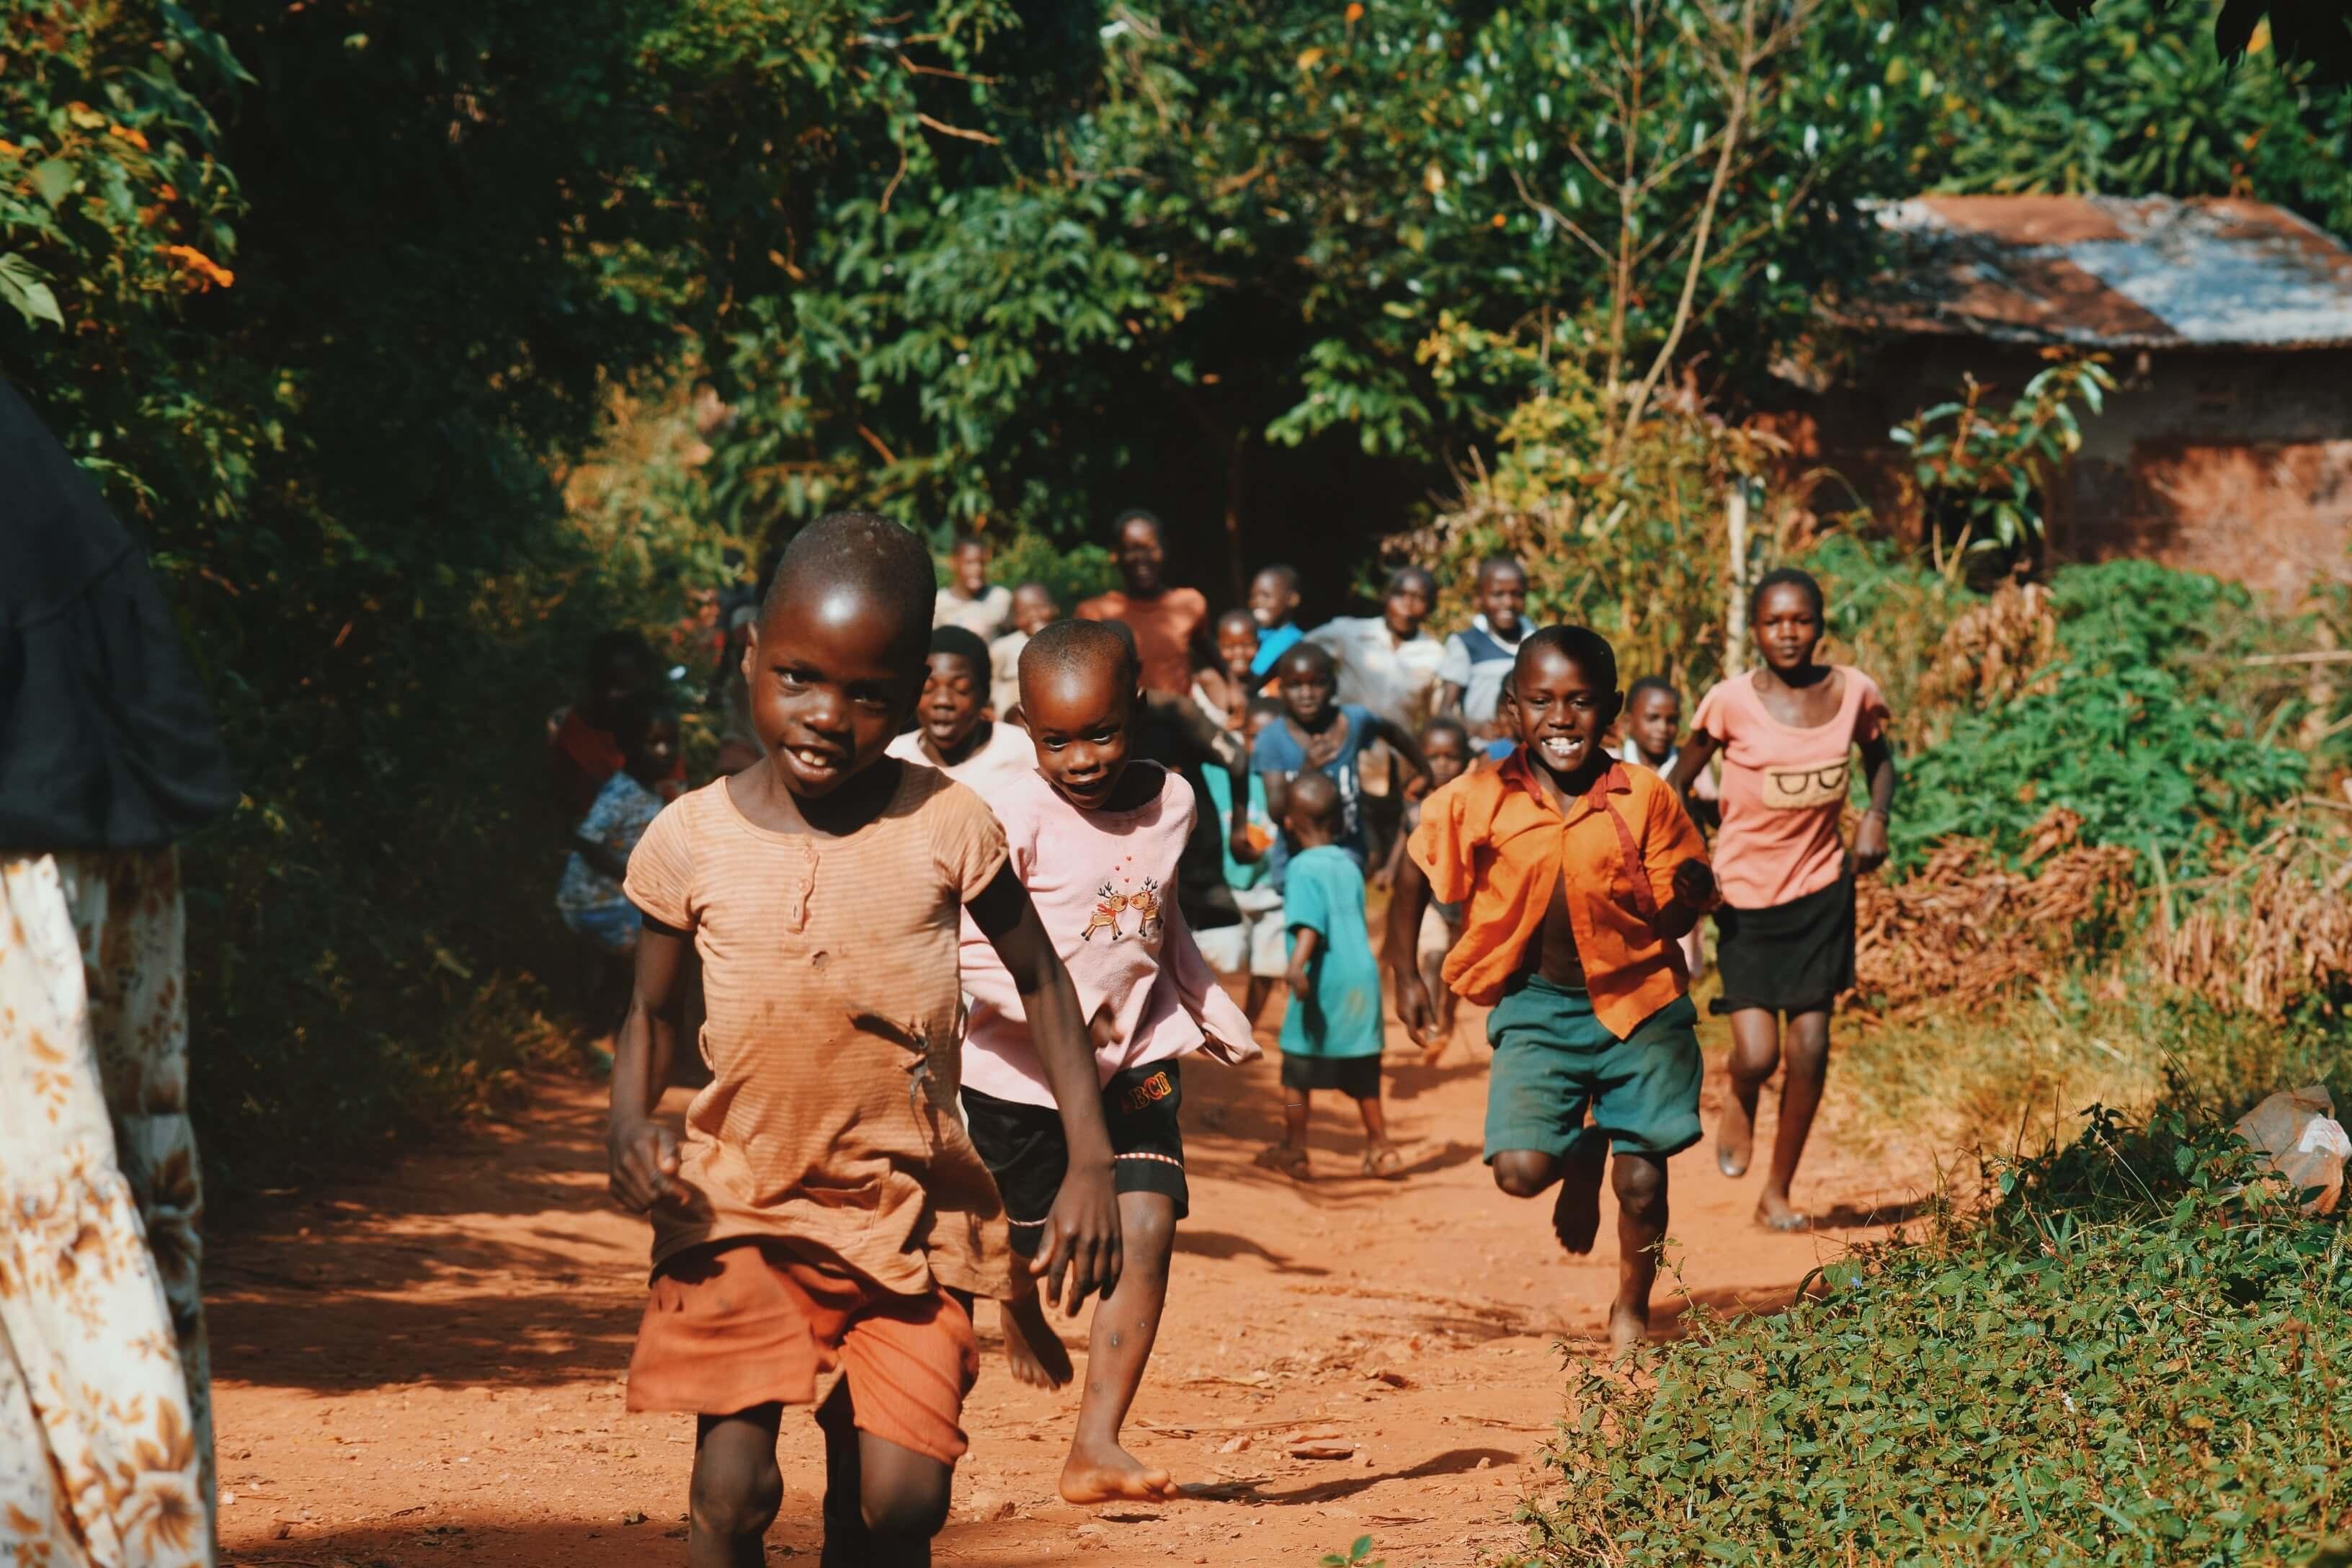 Group of children in a village running barefoot towards the camera smiling and laughing.